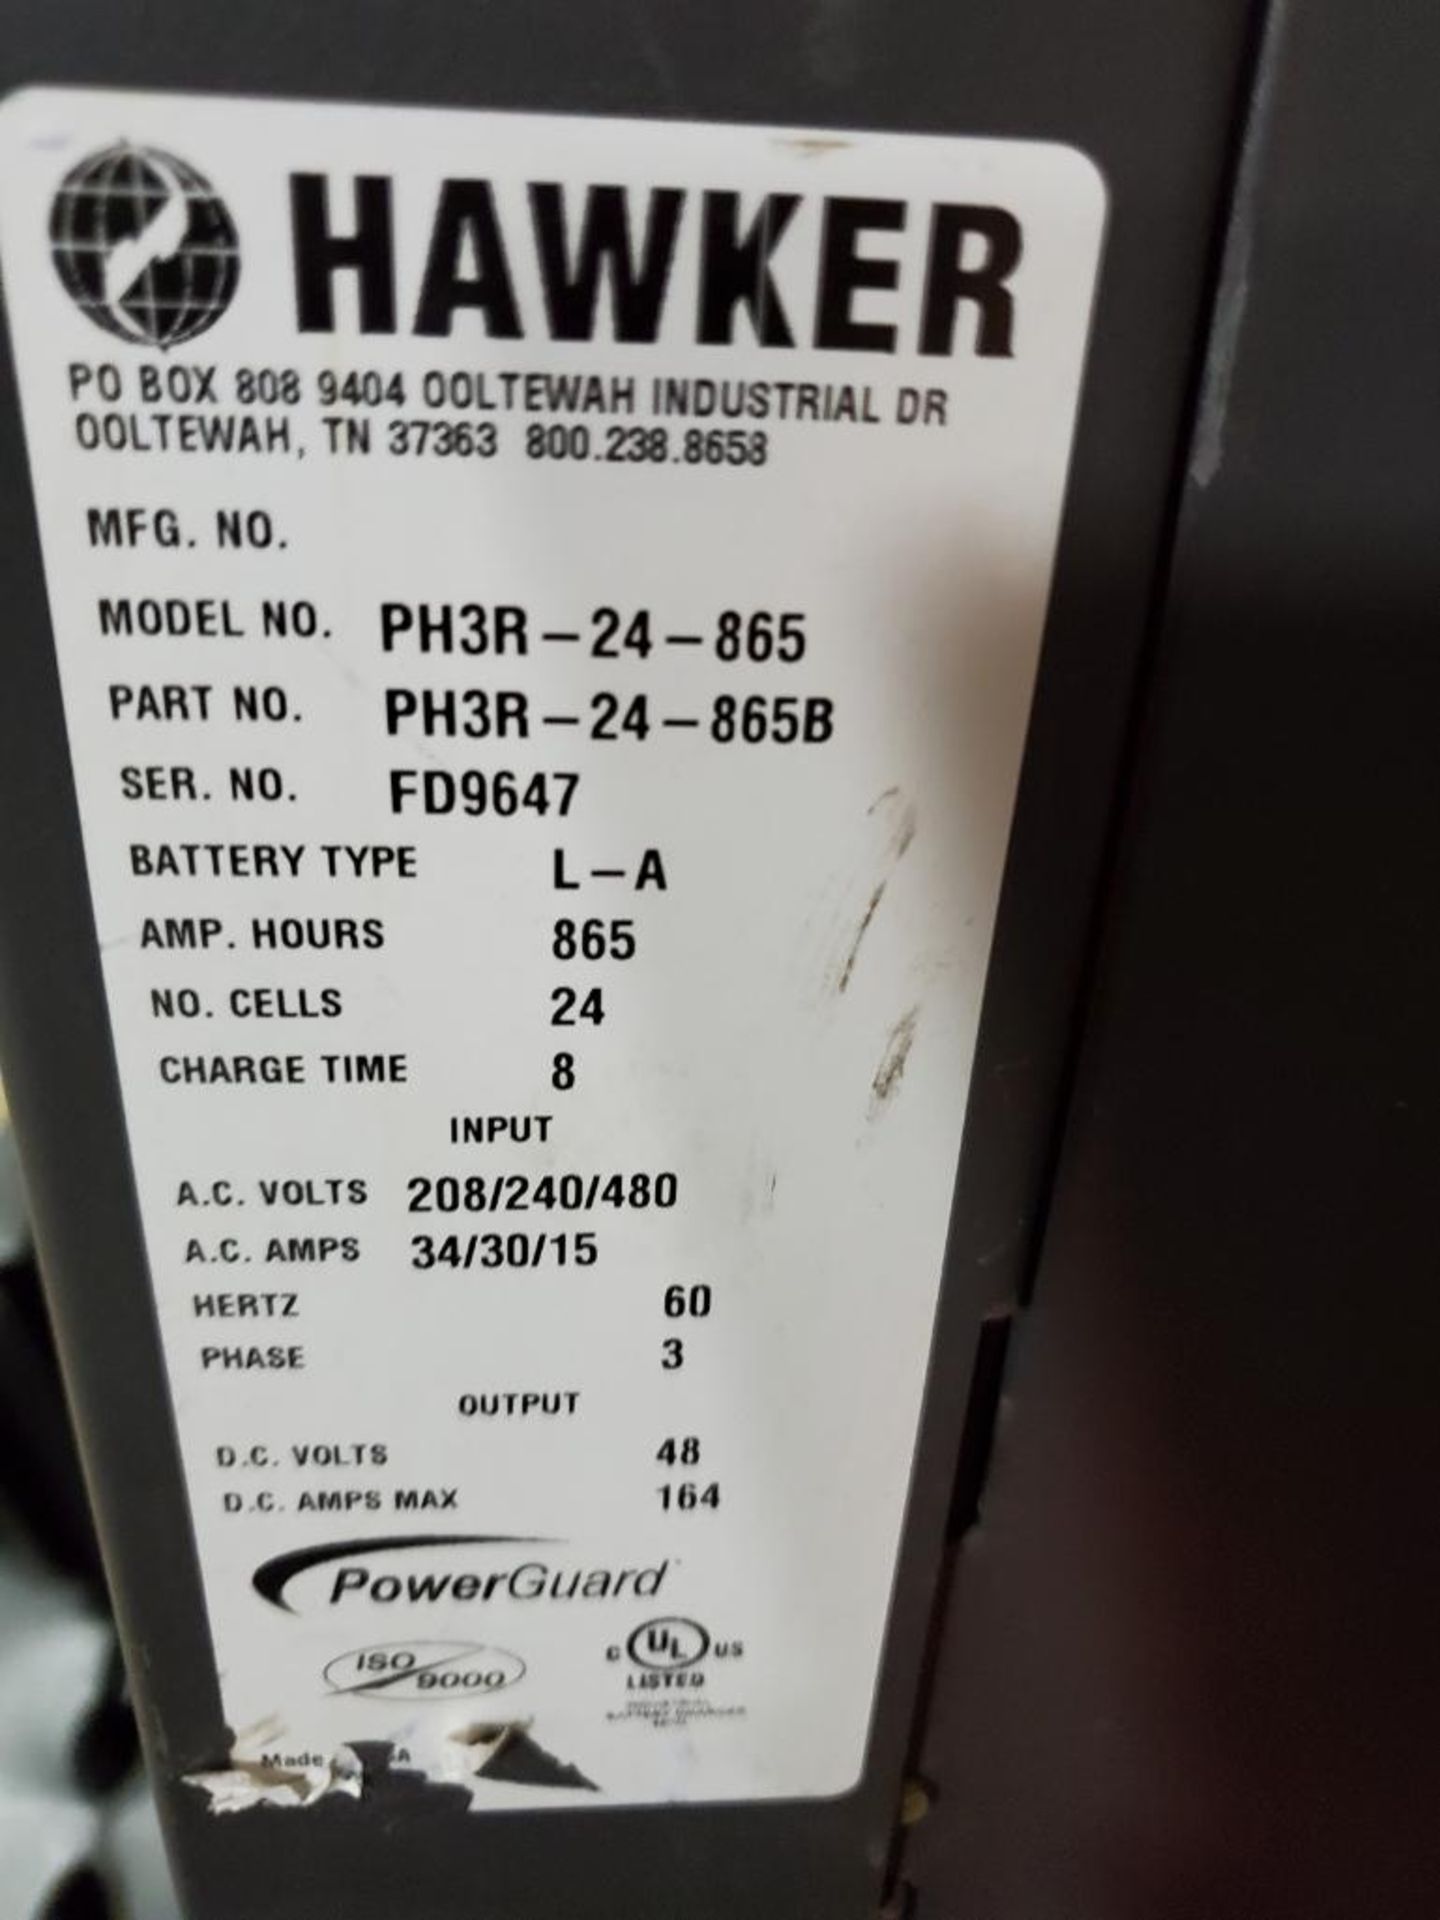 HAWKER POWER GUARD HD 48 V. BATTERY CHARGER, MODEL PH3R-24-865, S/N FD9647 - Image 3 of 3